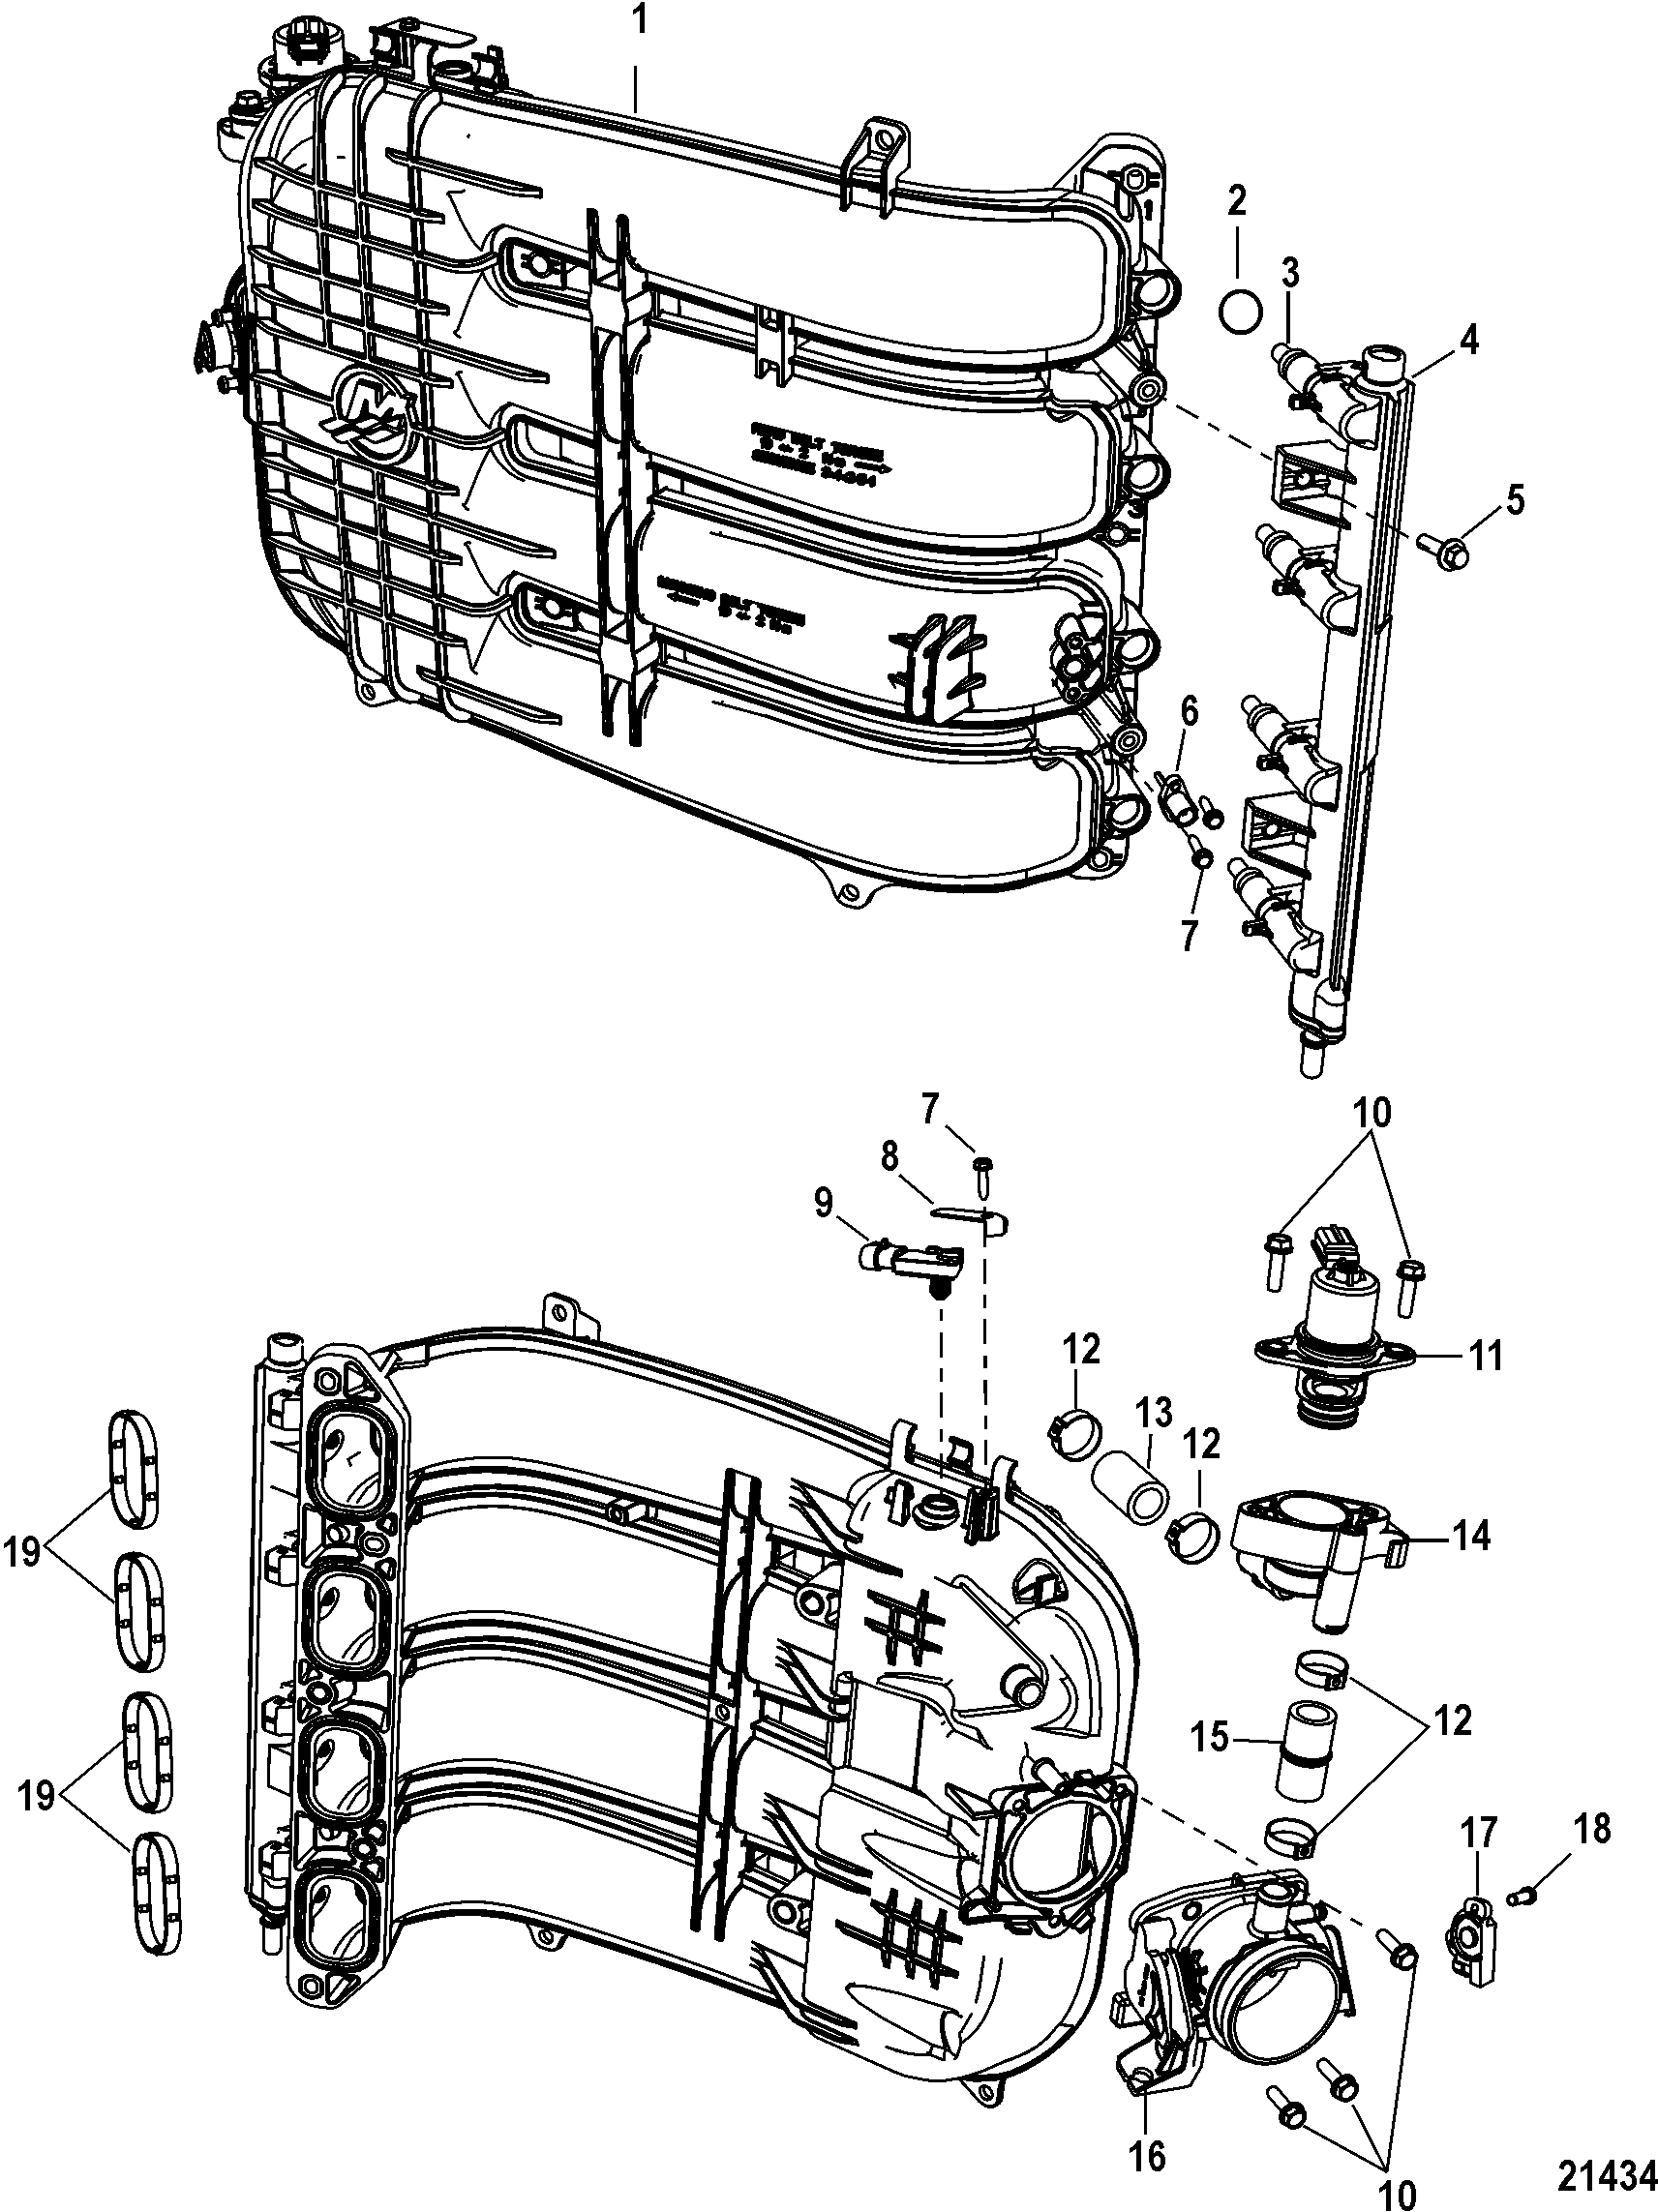 Intergrated Air Fuel Module Components